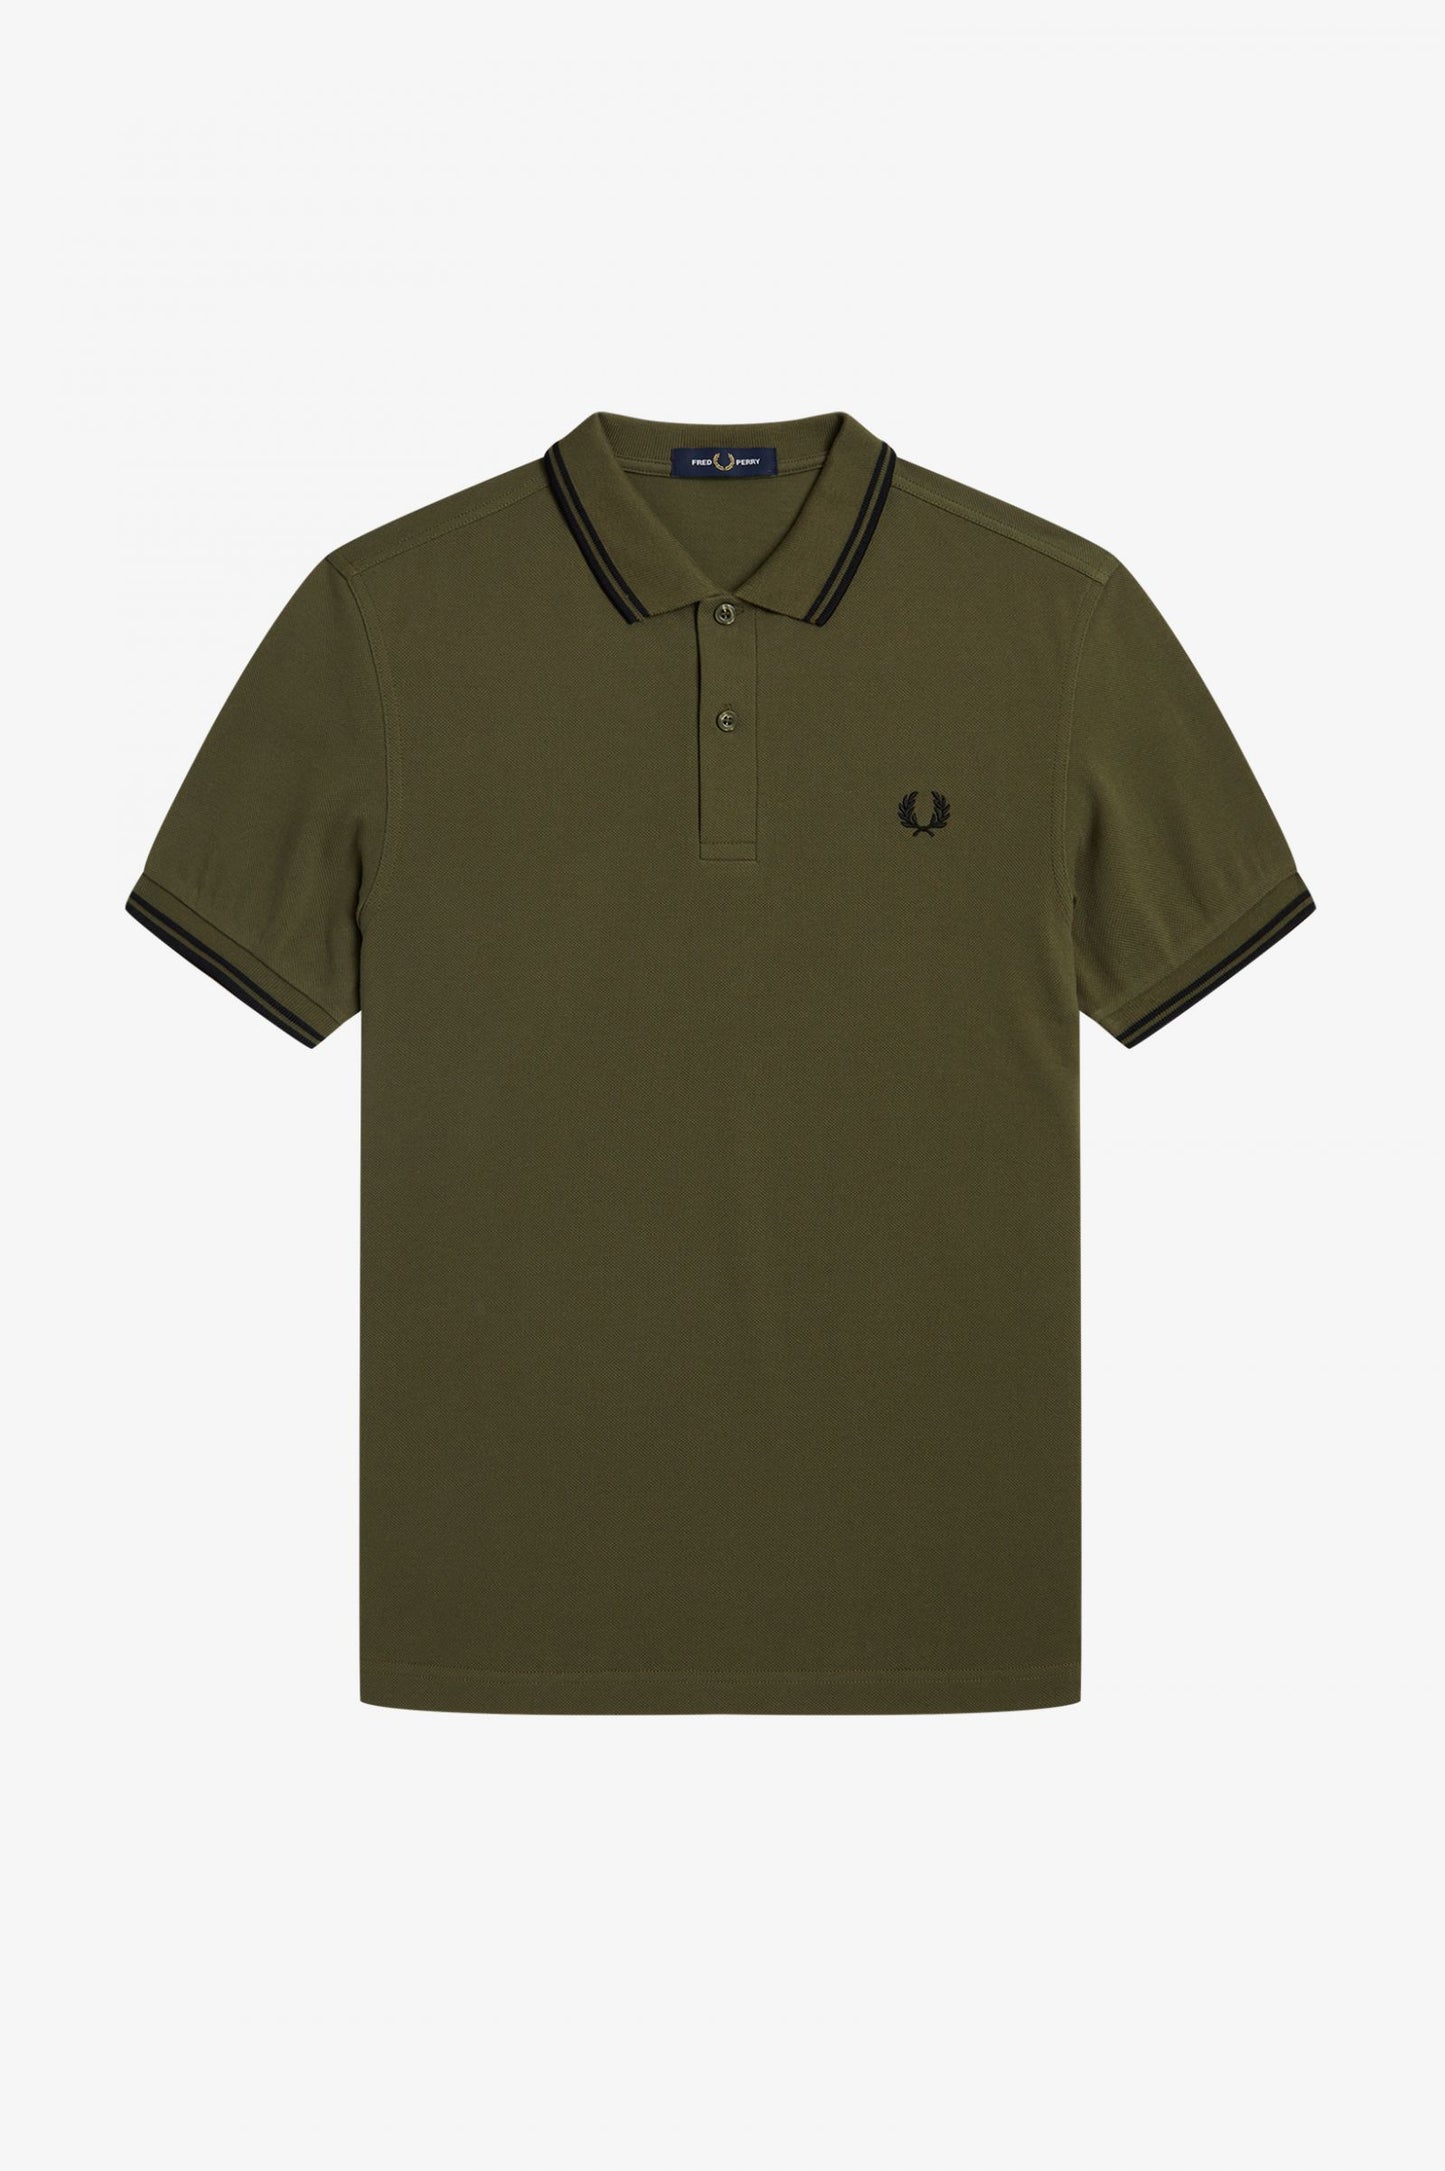 Fred Perry Polo M3600 Uniform Green / Black